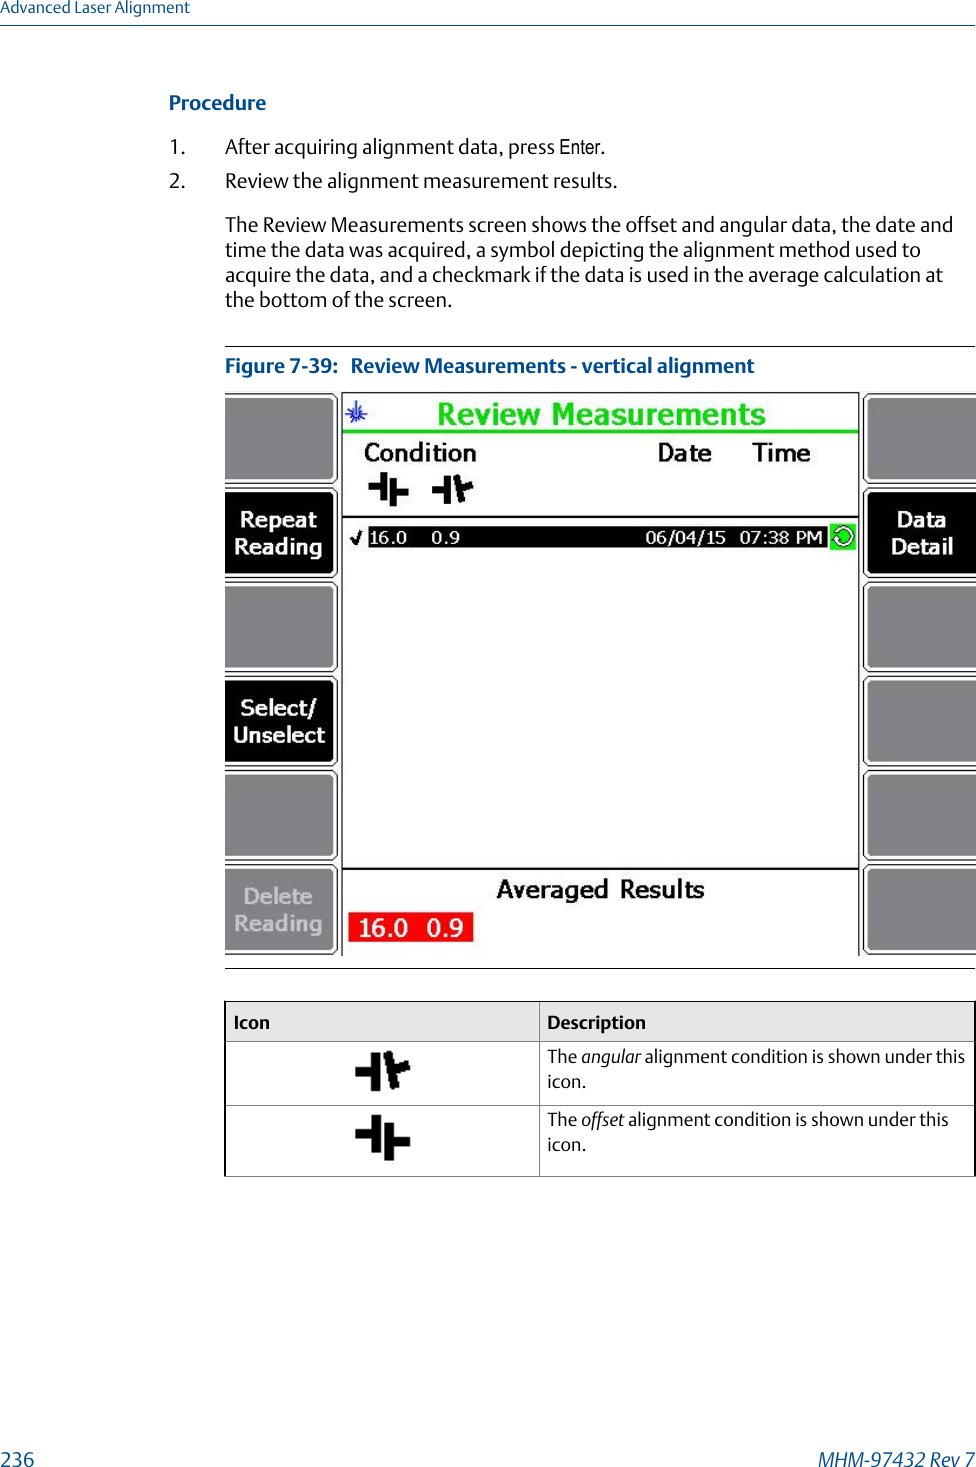 Procedure1. After acquiring alignment data, press Enter.2. Review the alignment measurement results.The Review Measurements screen shows the offset and angular data, the date andtime the data was acquired, a symbol depicting the alignment method used toacquire the data, and a checkmark if the data is used in the average calculation atthe bottom of the screen.Review Measurements - vertical alignmentFigure 7-39:   Icon DescriptionThe angular alignment condition is shown under thisicon.The offset alignment condition is shown under thisicon.Advanced Laser Alignment236 MHM-97432 Rev 7